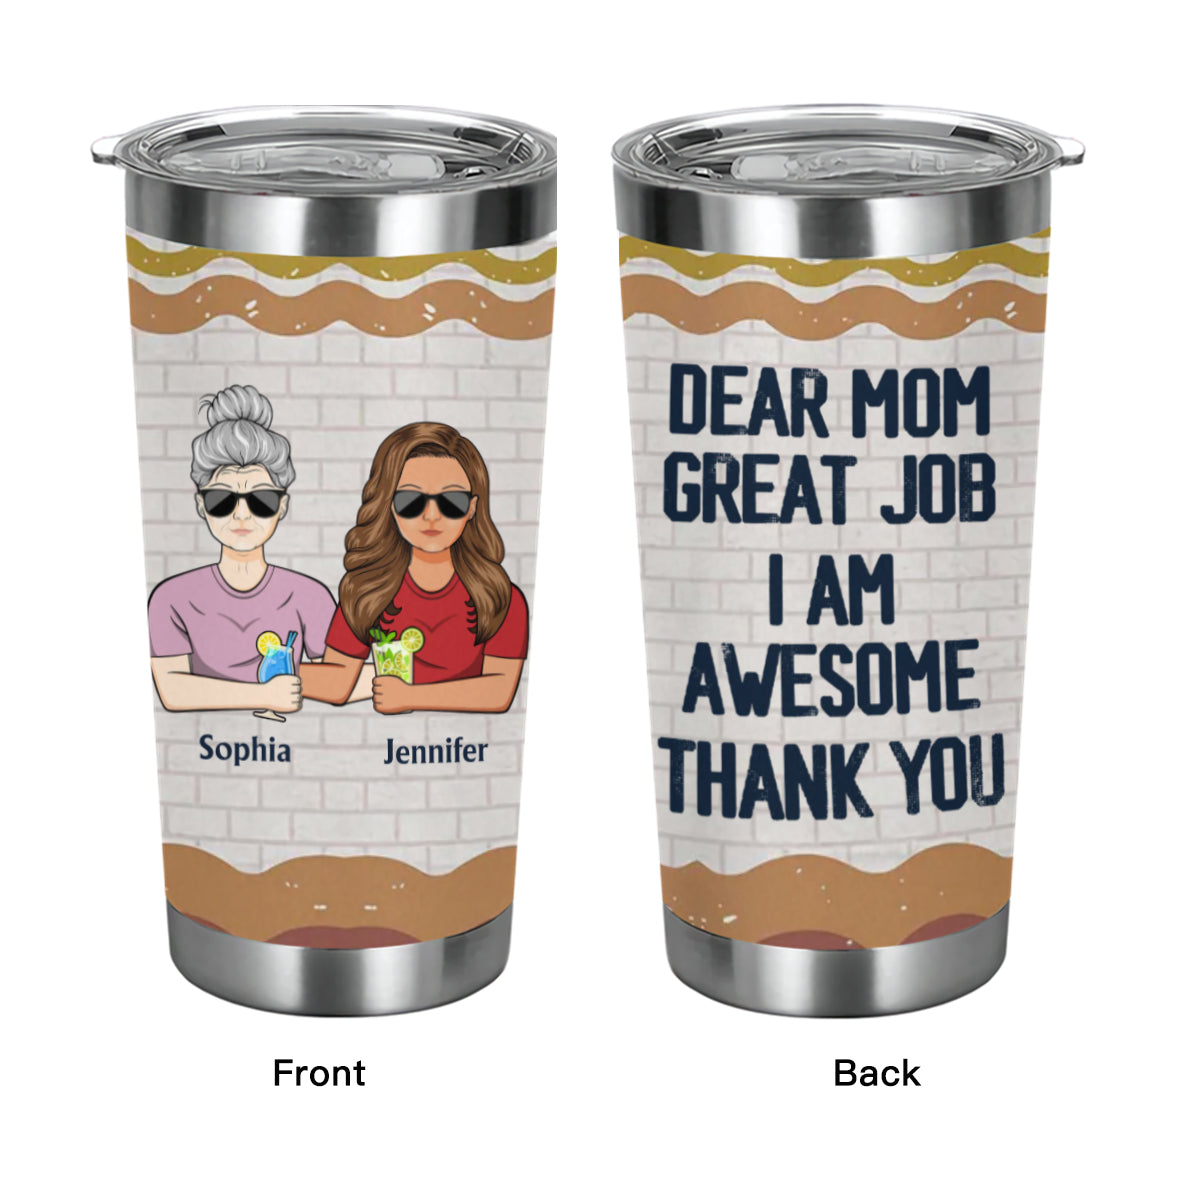 Dear Mom Great Job I'm Awesome Thank You - Mother Gift - Personalized Custom Tumbler